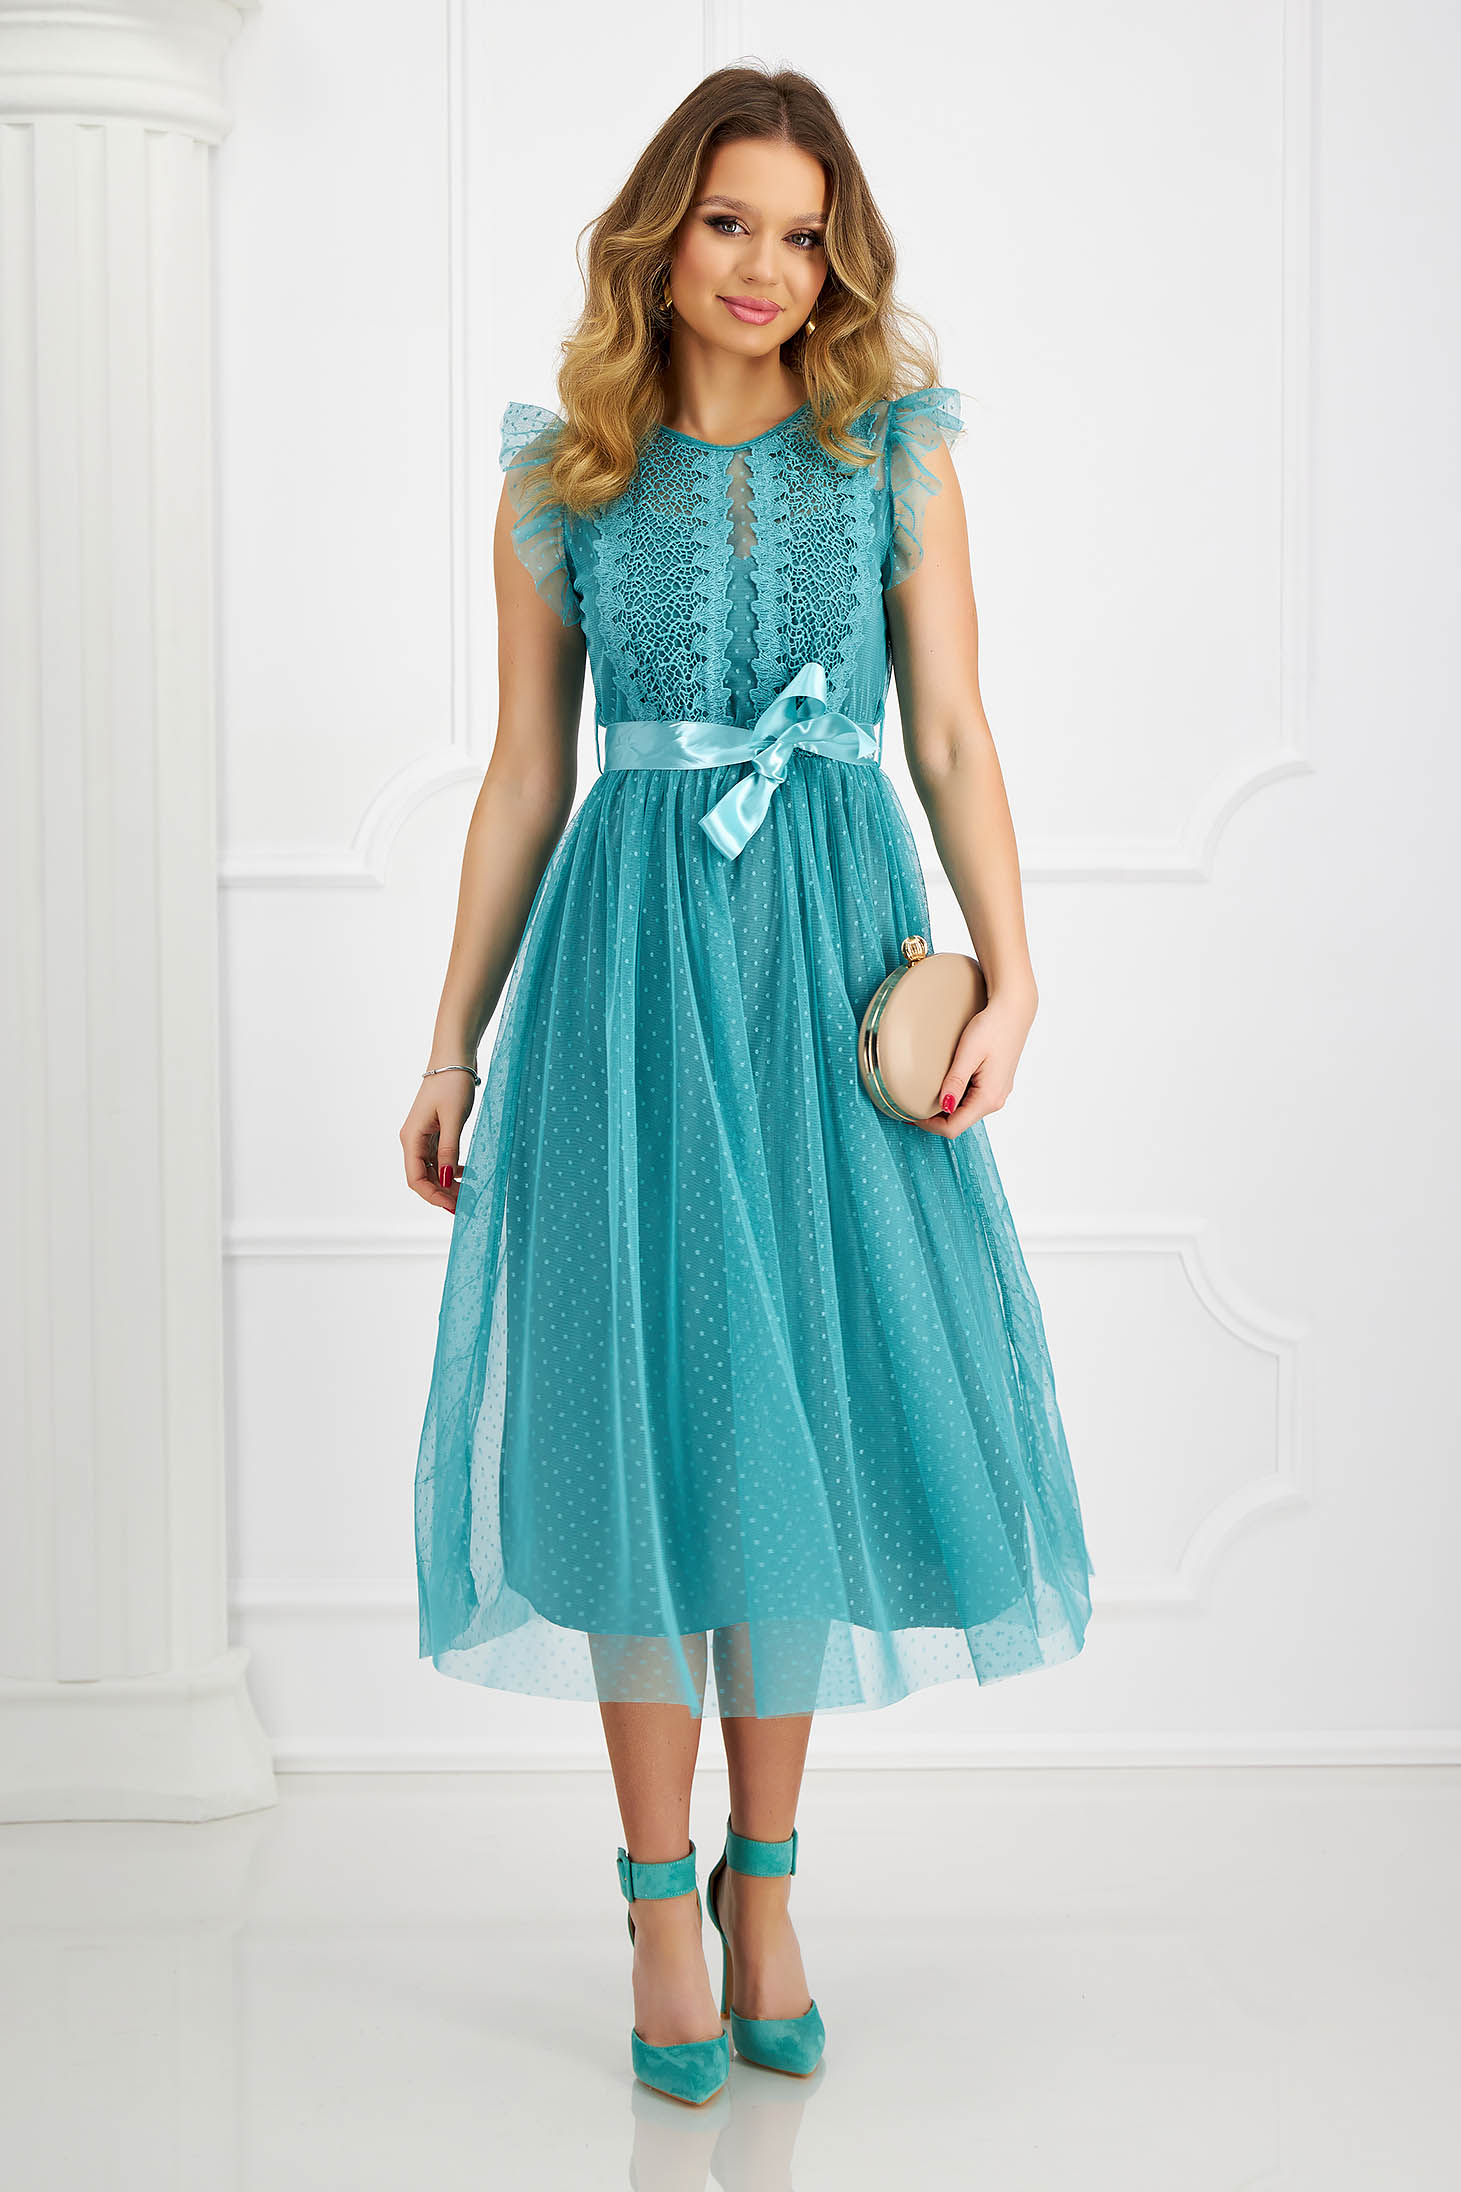 Turquoise dress from tulle cloche with elastic waist knitted lace 6 - StarShinerS.com